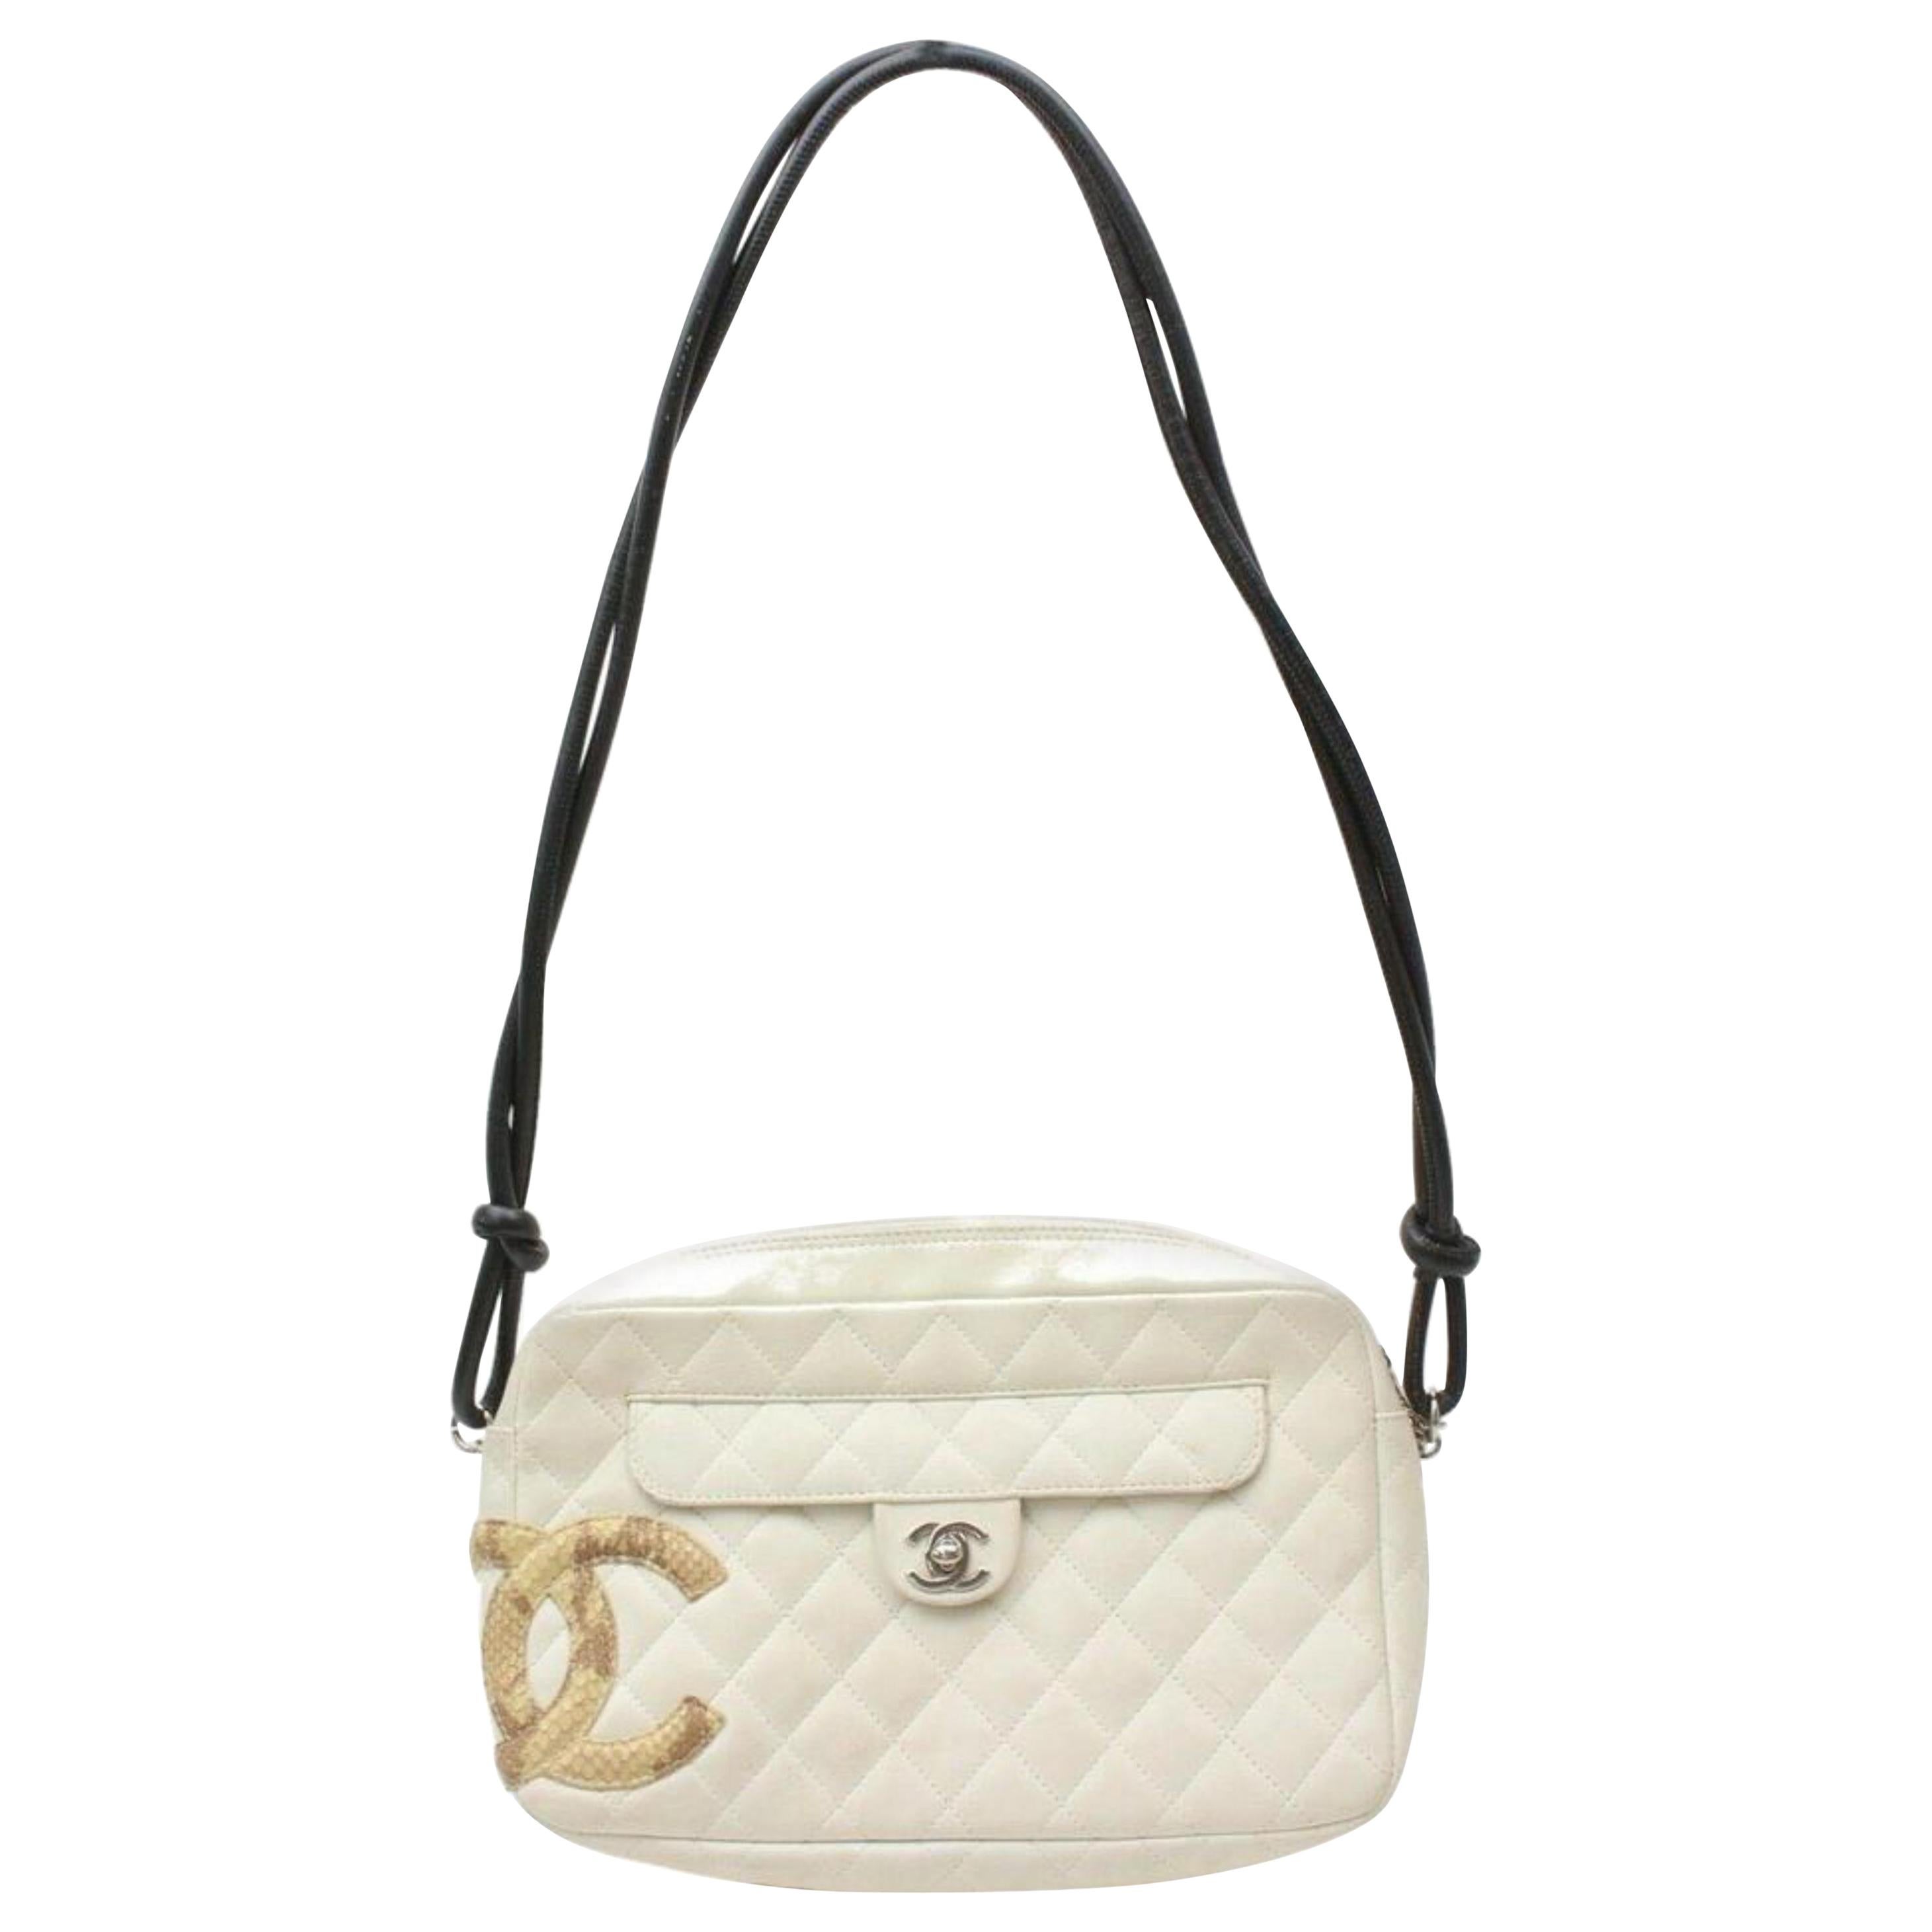 Chanel purse costume,made from a tv box, white quited fabric